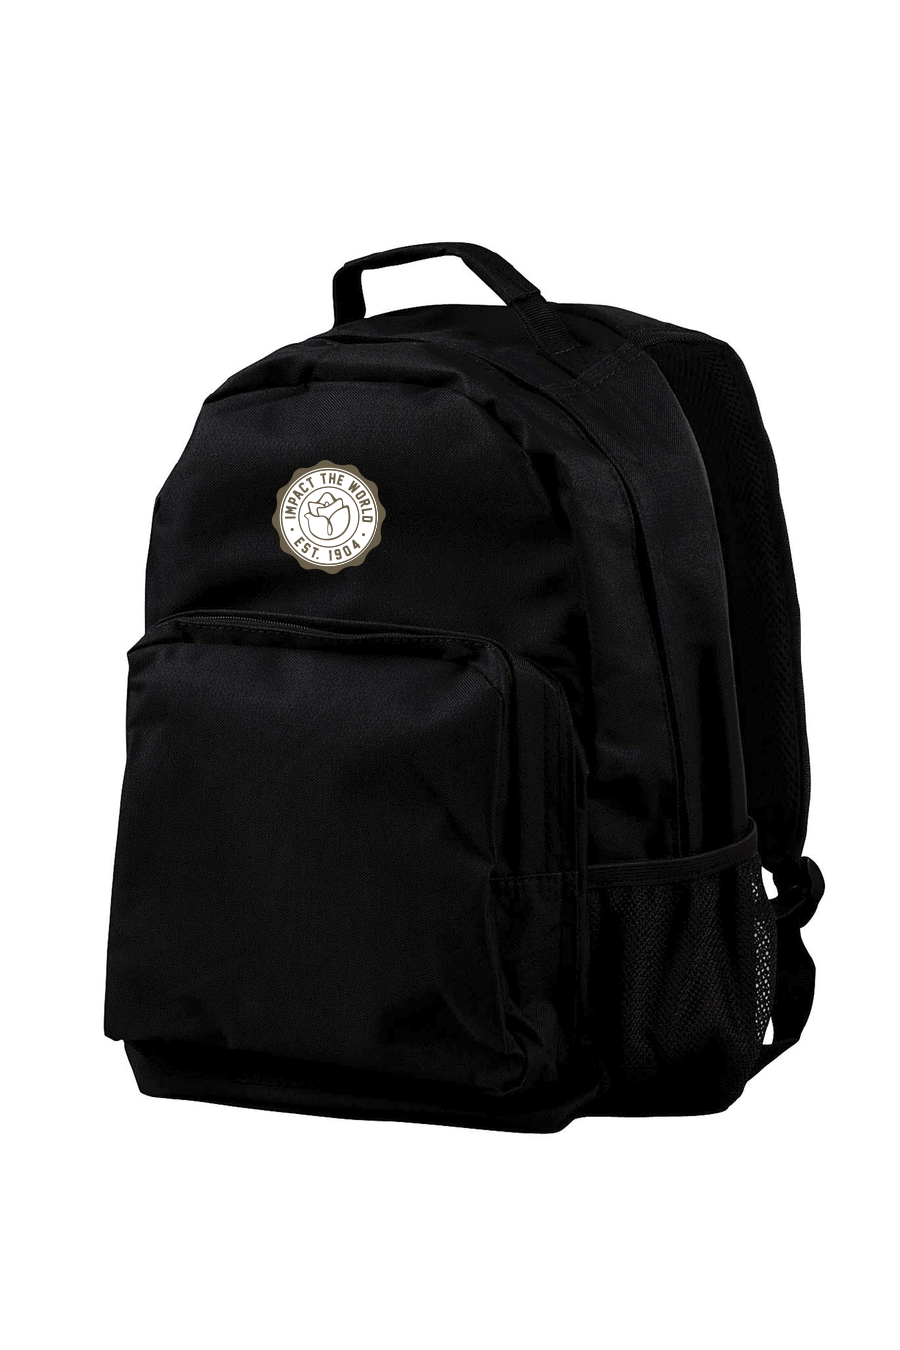 Impact the World Patch Book Bag